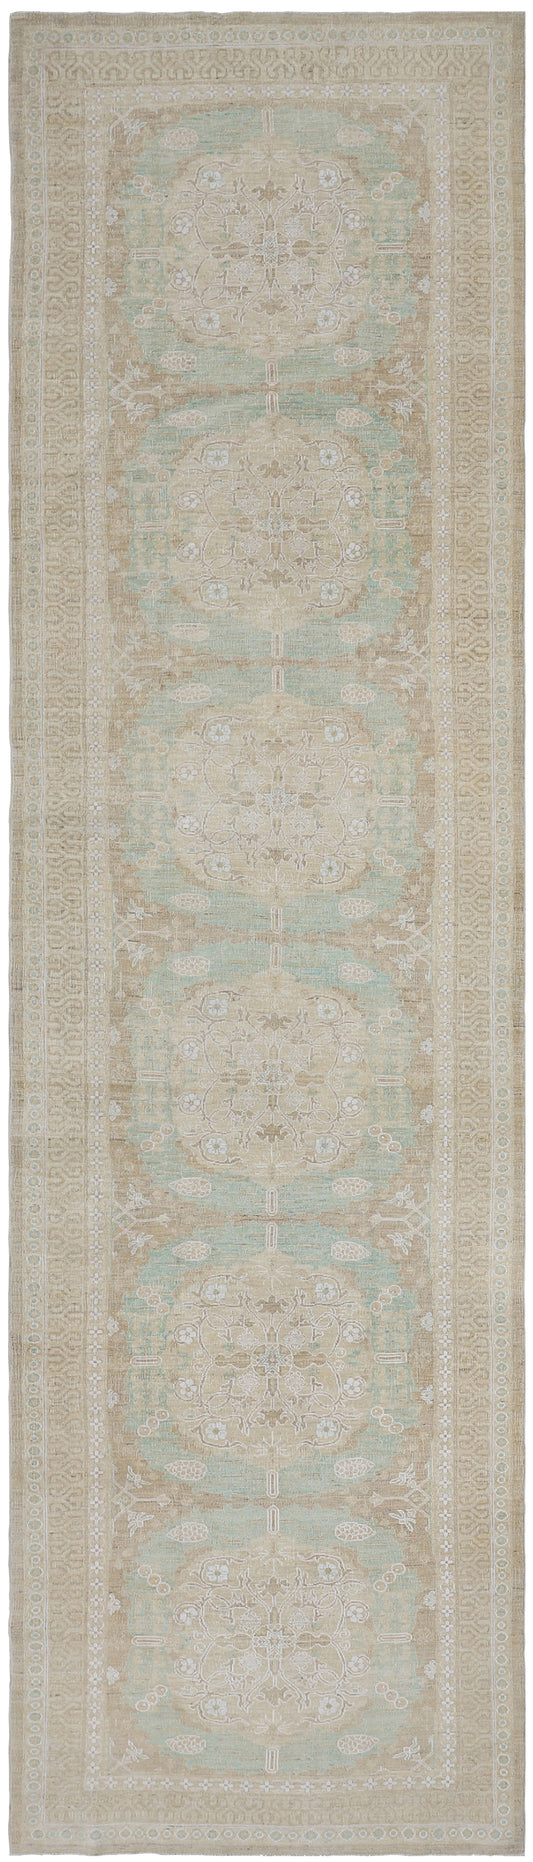 4'x15' Fine Wool with Cotton Green White Tan Spanish Design Ariana Luxury Wide and Long Runner Rug